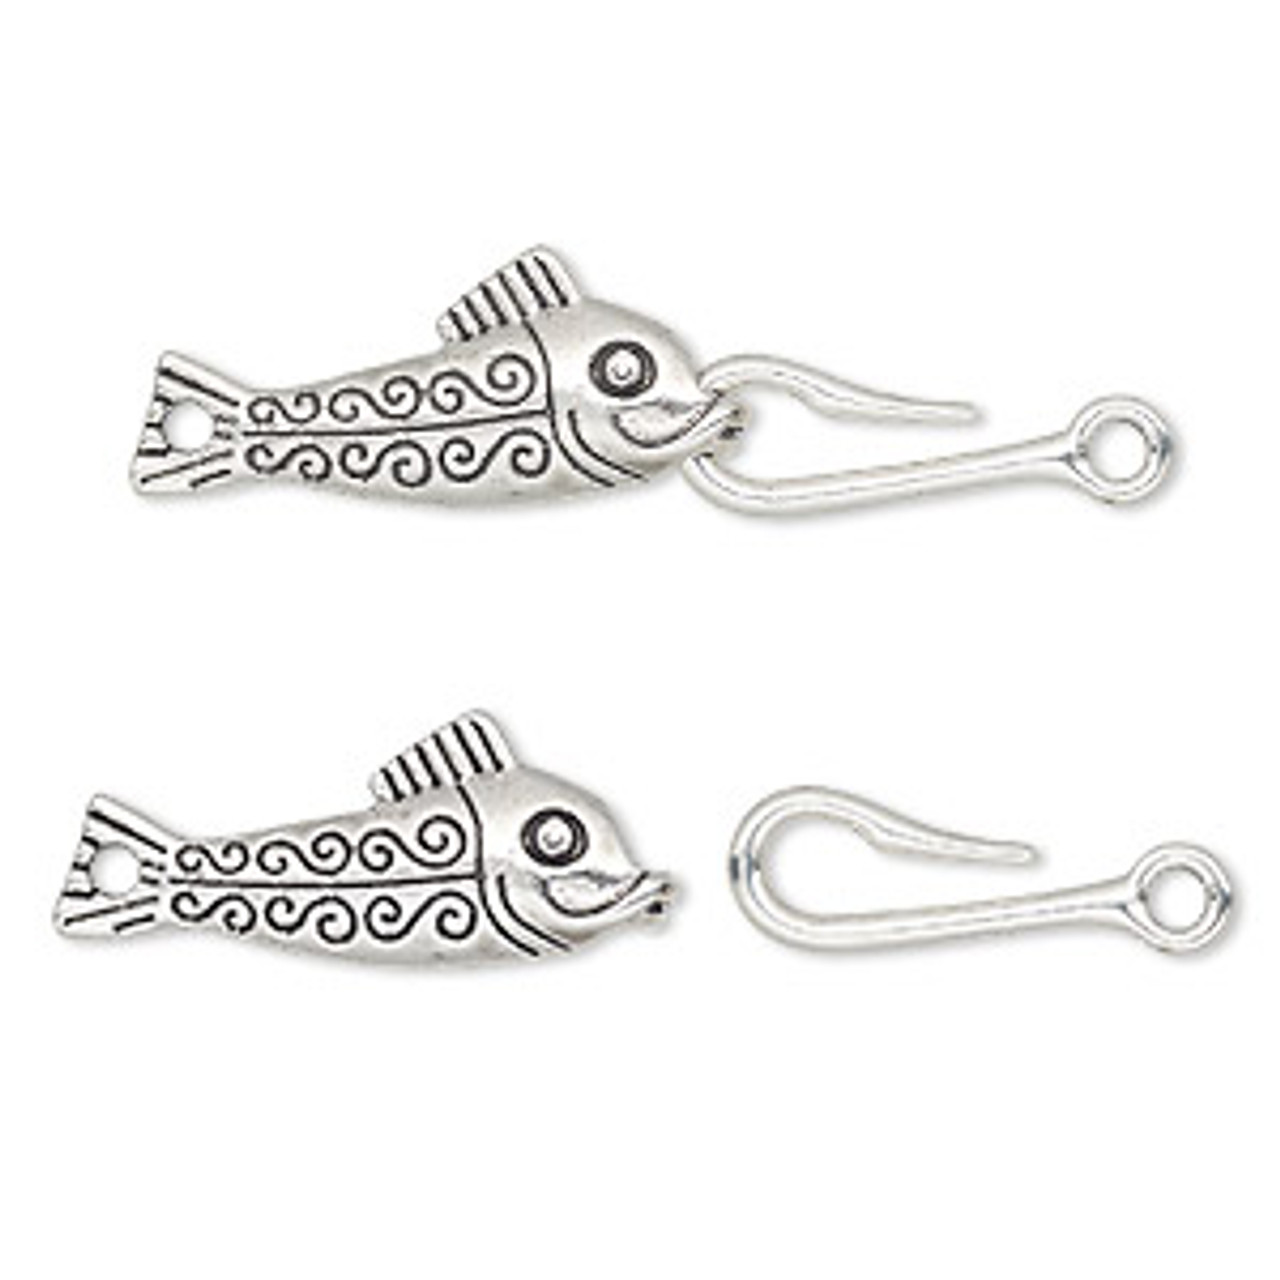 Antique Silver Plated Hook Clasps, Silver Fish Hook Charms, Silver